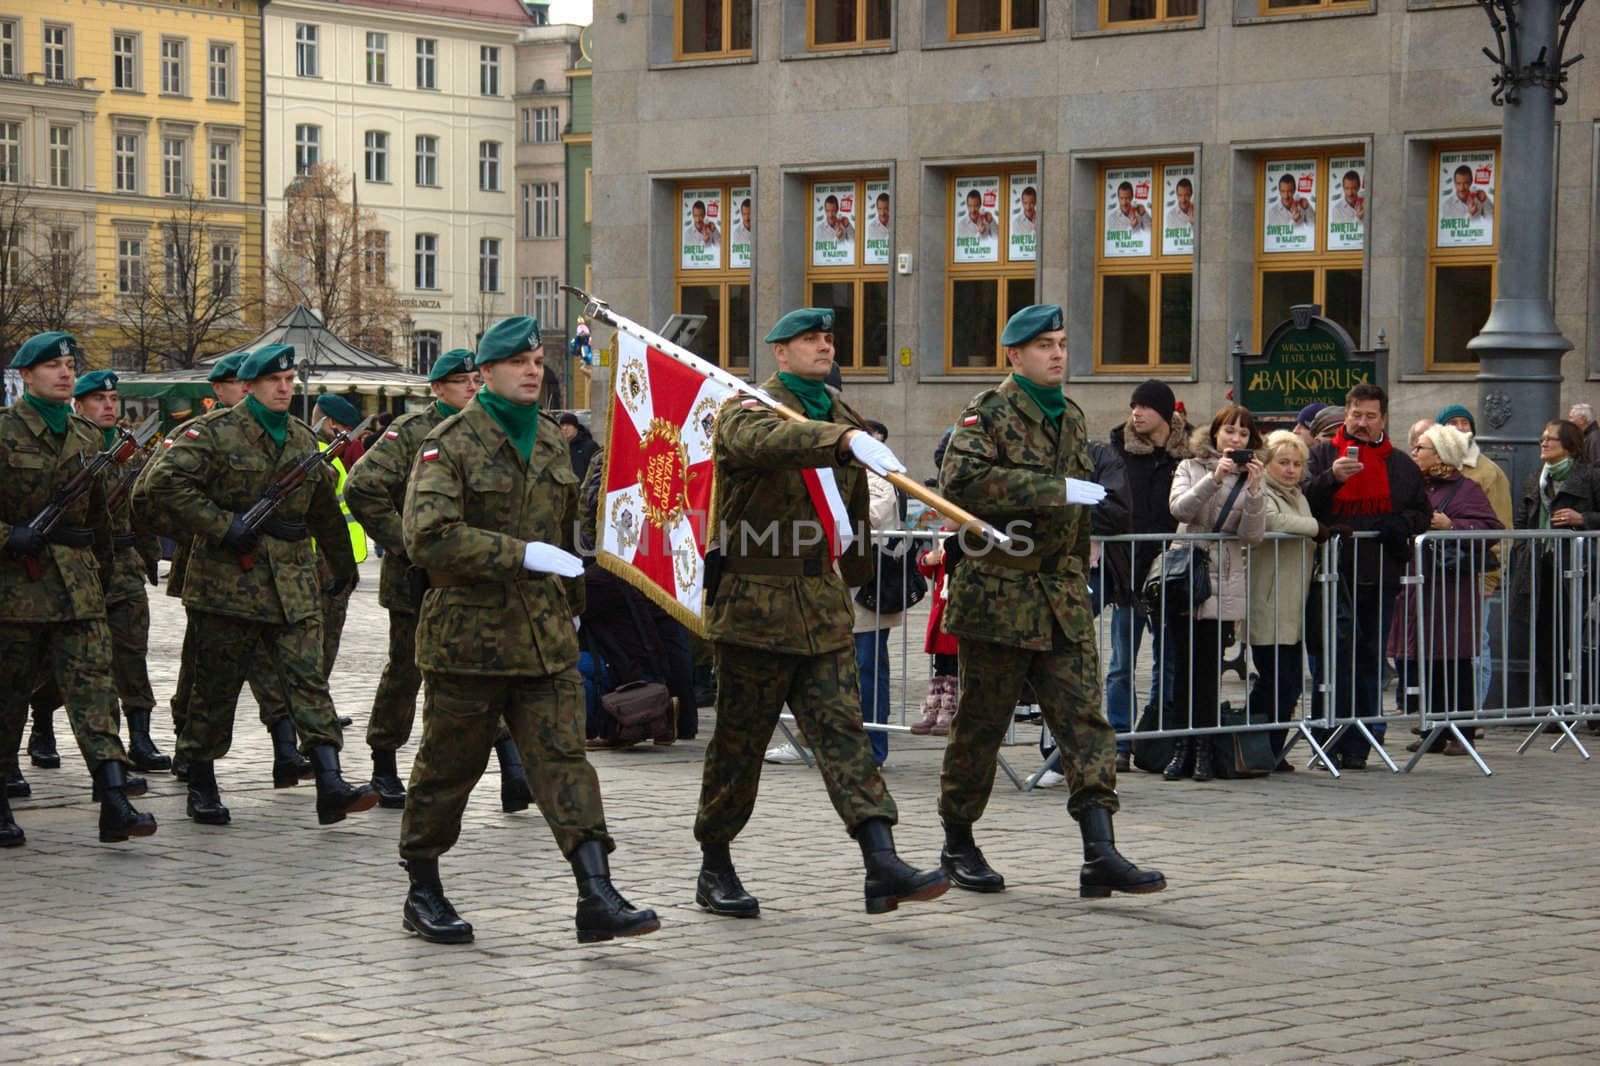 WROCLAW, POLAND - DECEMBER 2: Polish army, engineering training center for troops receives new army banner. Parade with new banner on December 2, 2011.